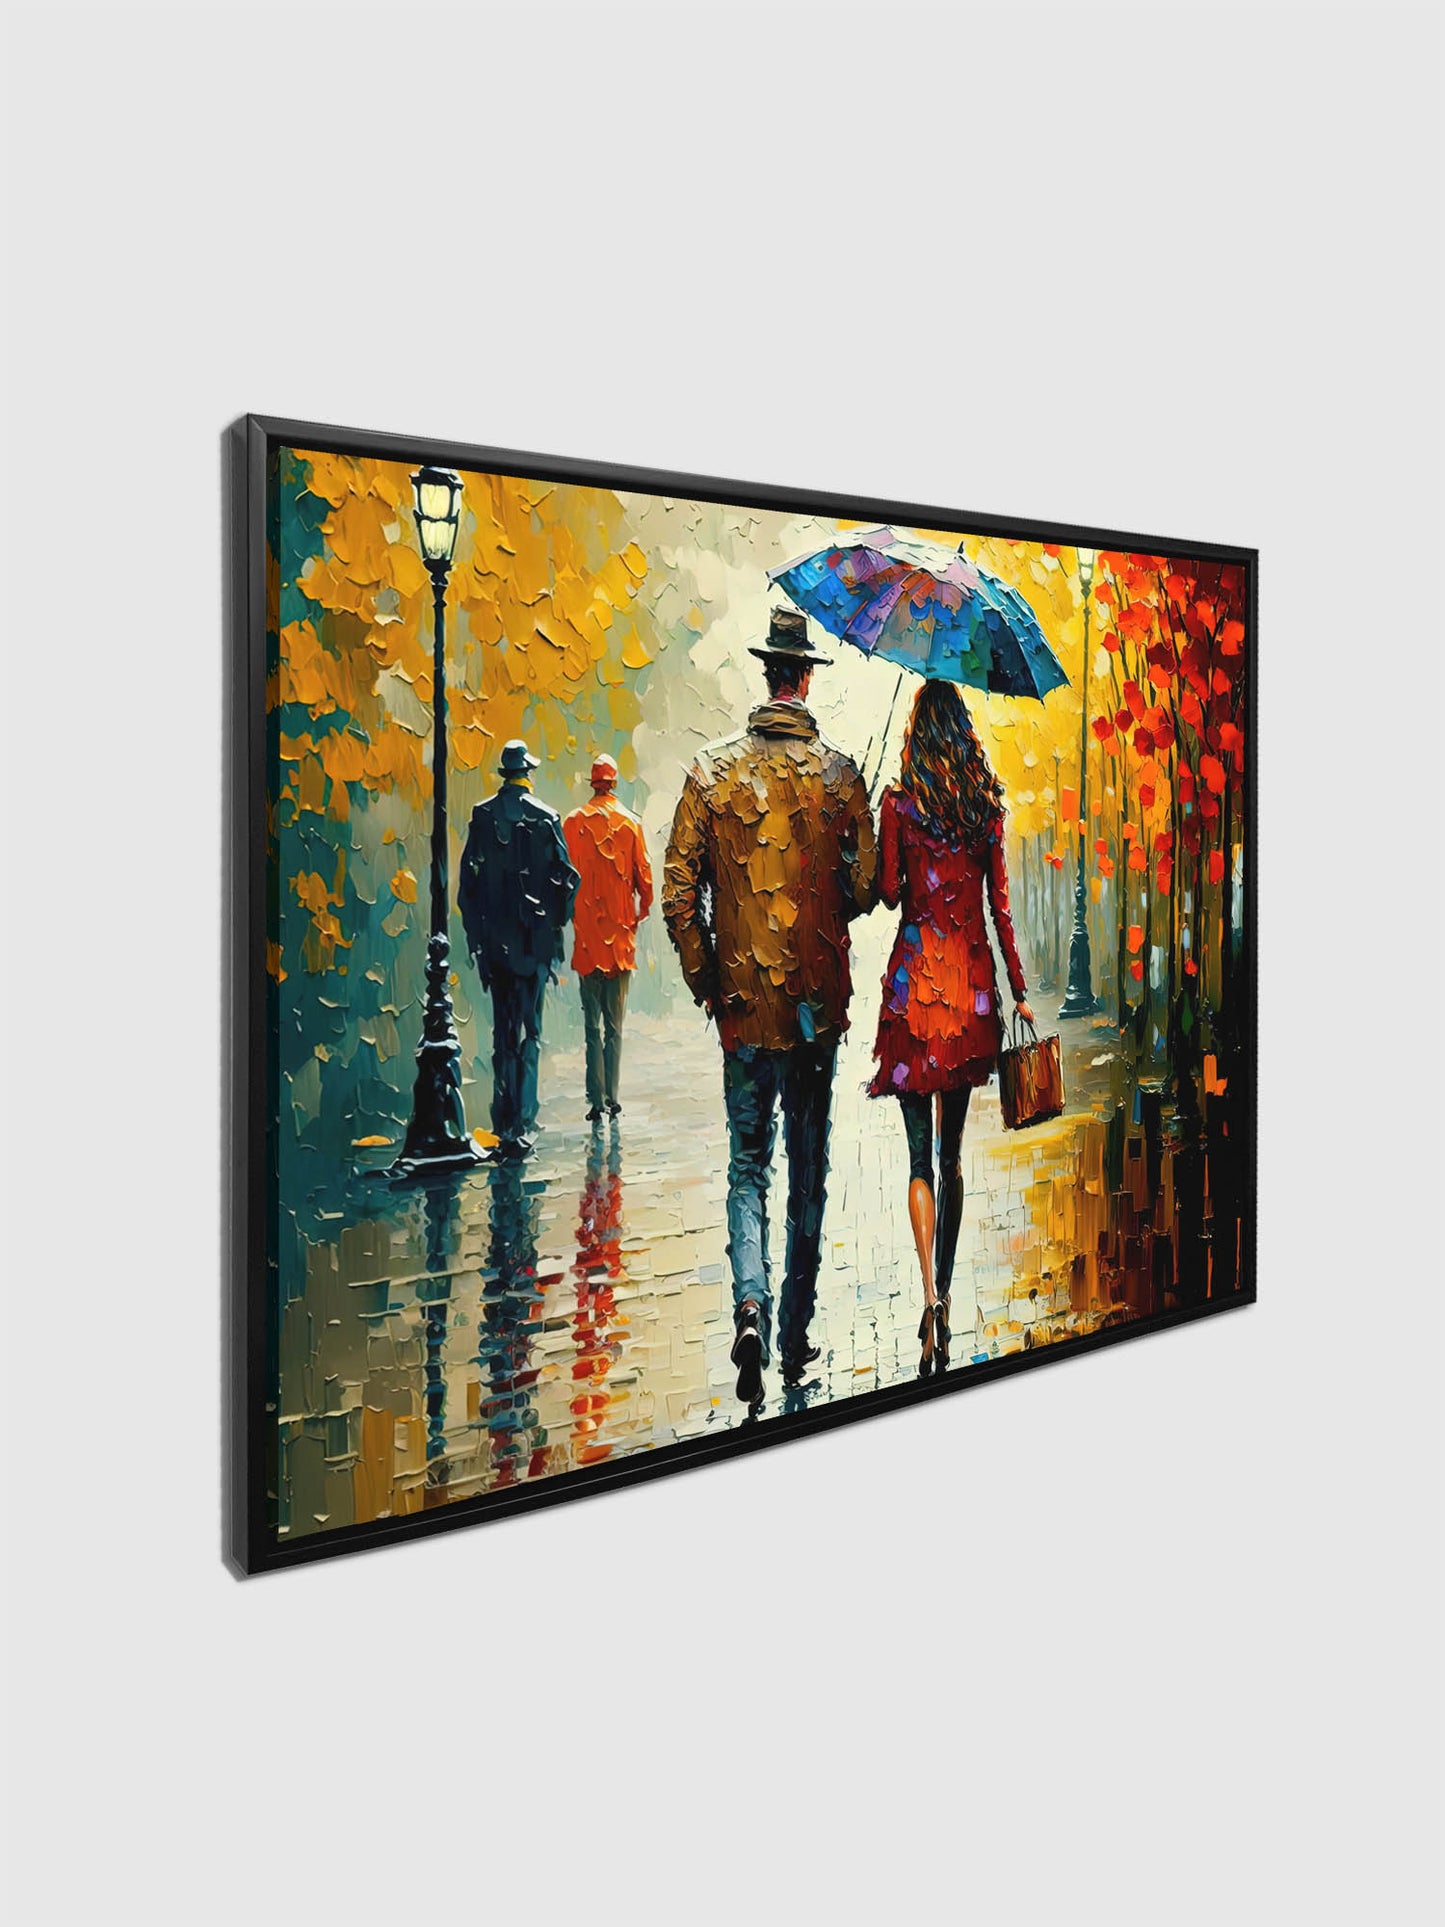 Canvas Print Painted Couple In Fall- Vintage Artwork-Wall decor